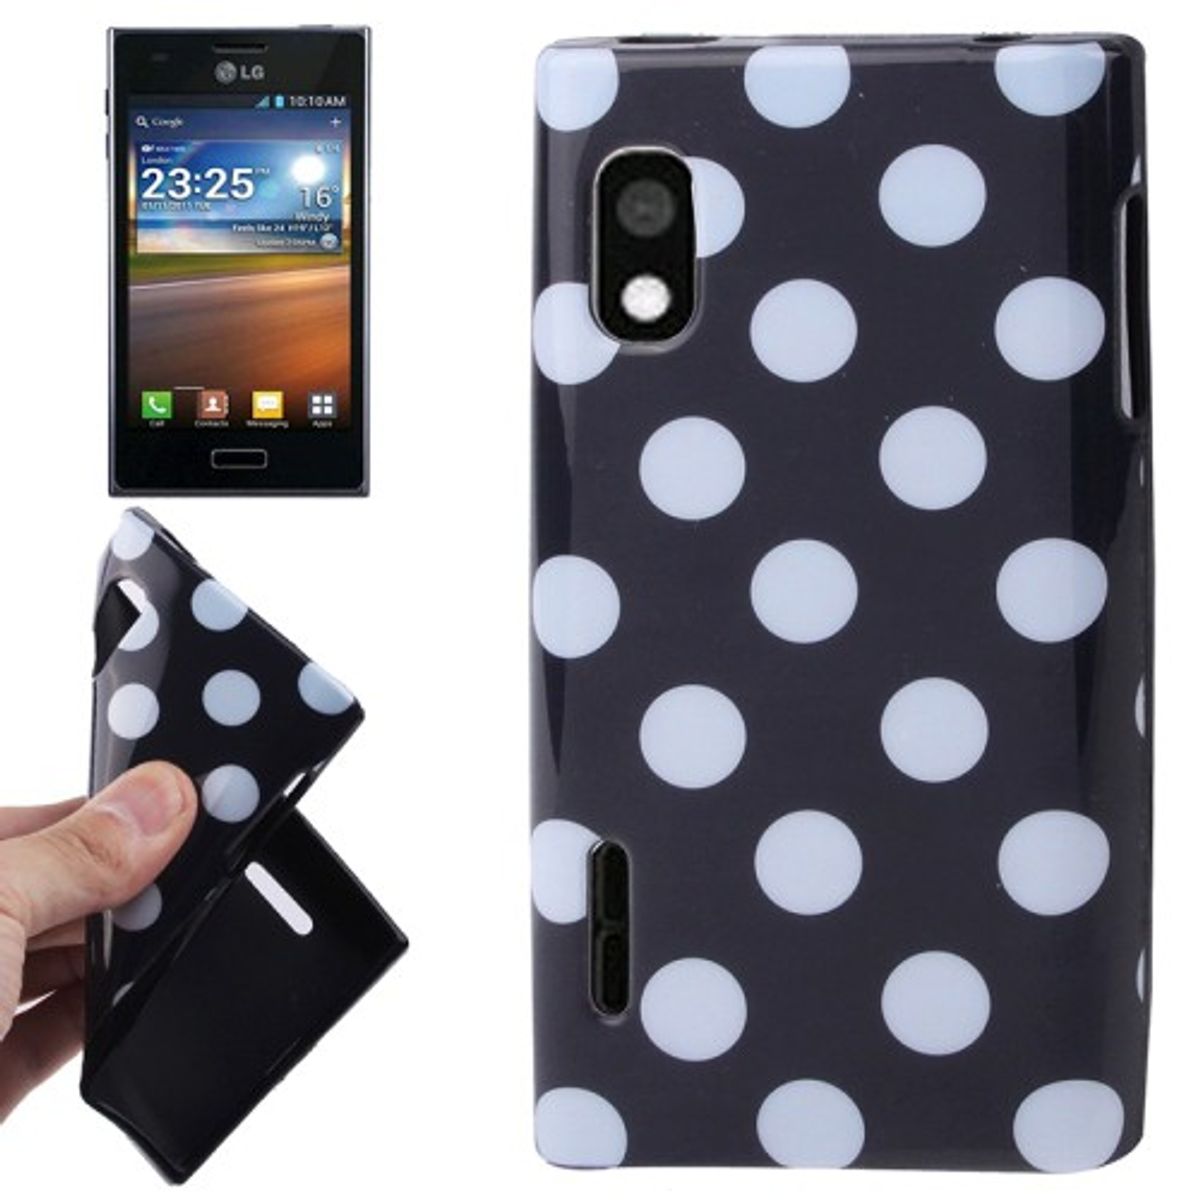 Protective TPU dots case for cell phone Lg Optimus L5 / E610